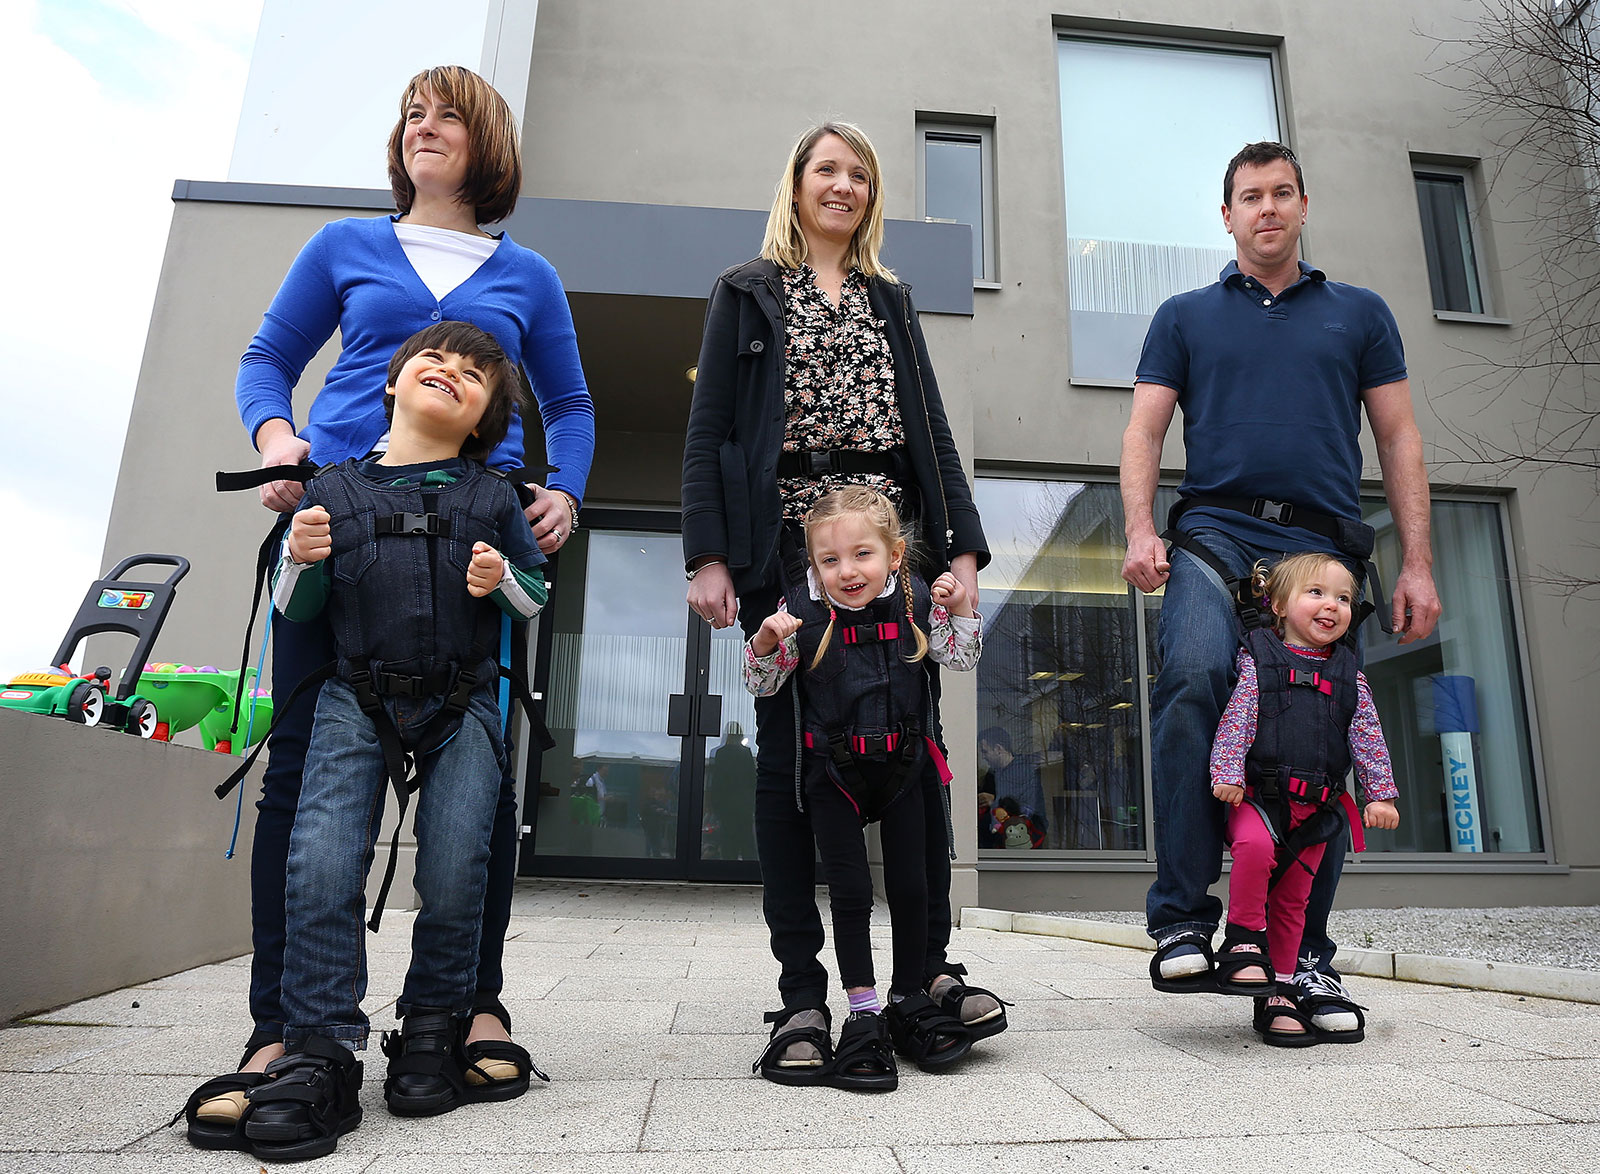 The Upsee Harness- Invented by a mother that helps disabled children walk for the first time